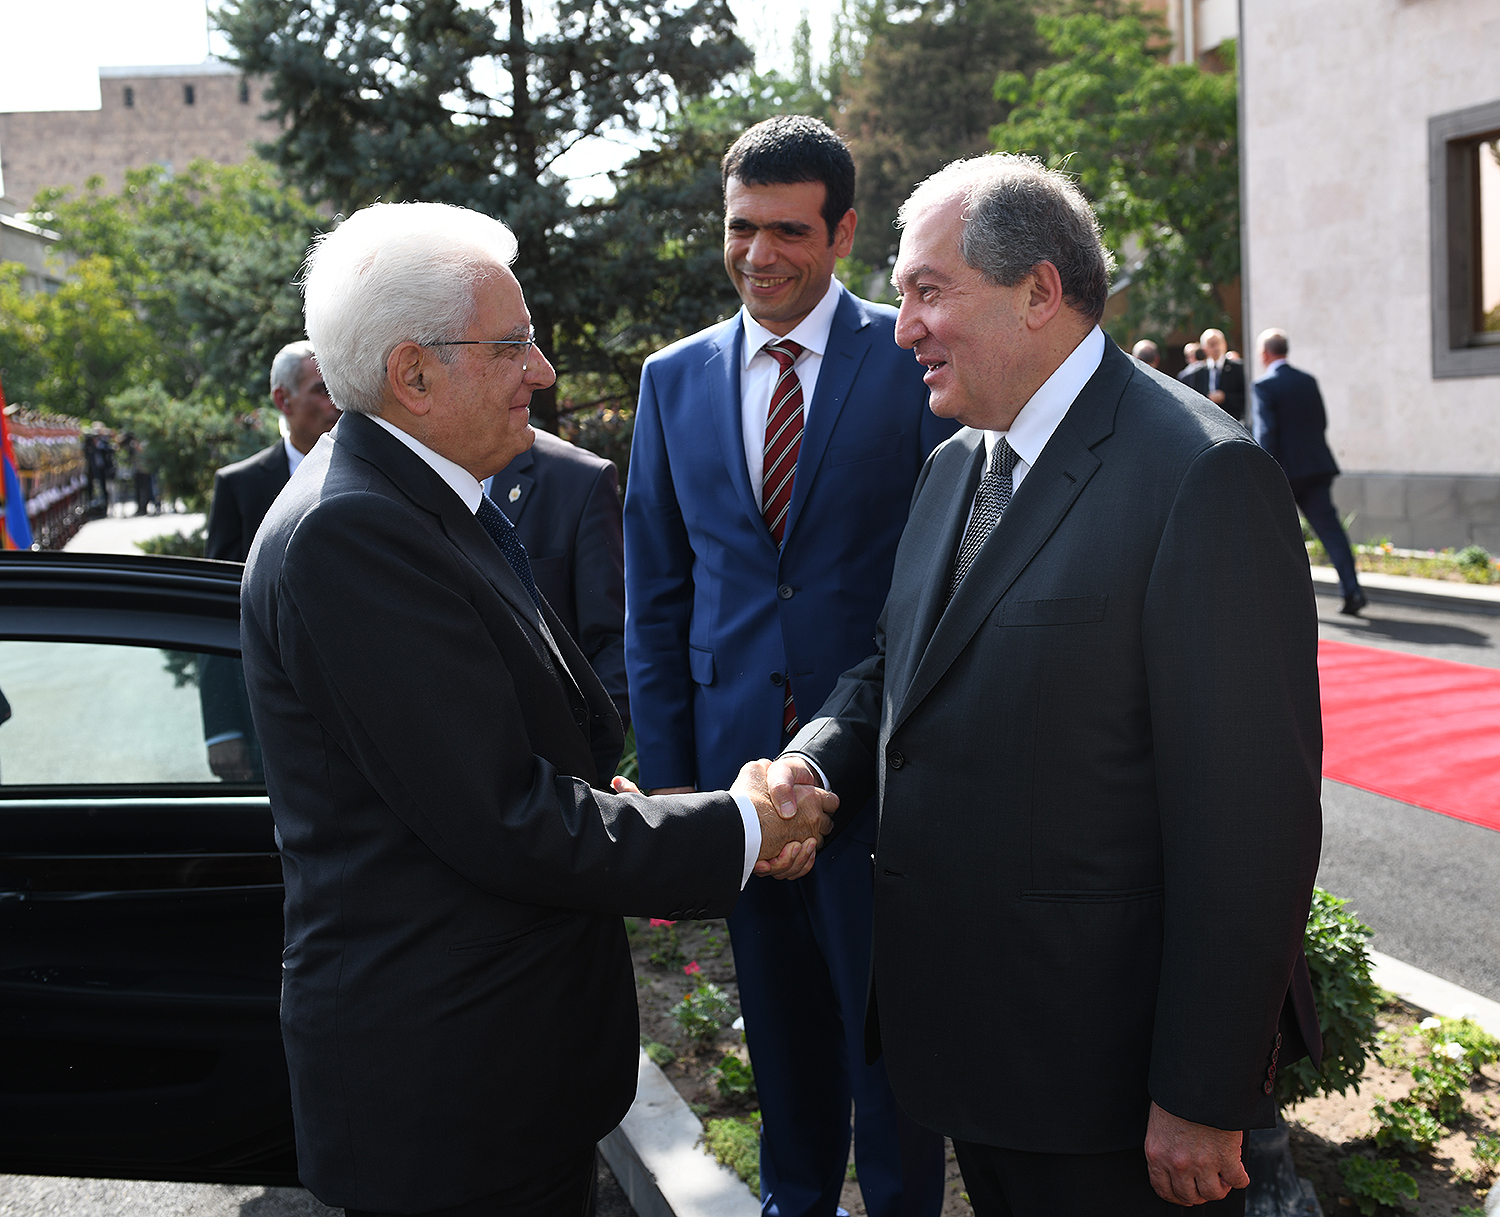 Official welcoming ceremony of the President of Italy took place at the Presidential Palace